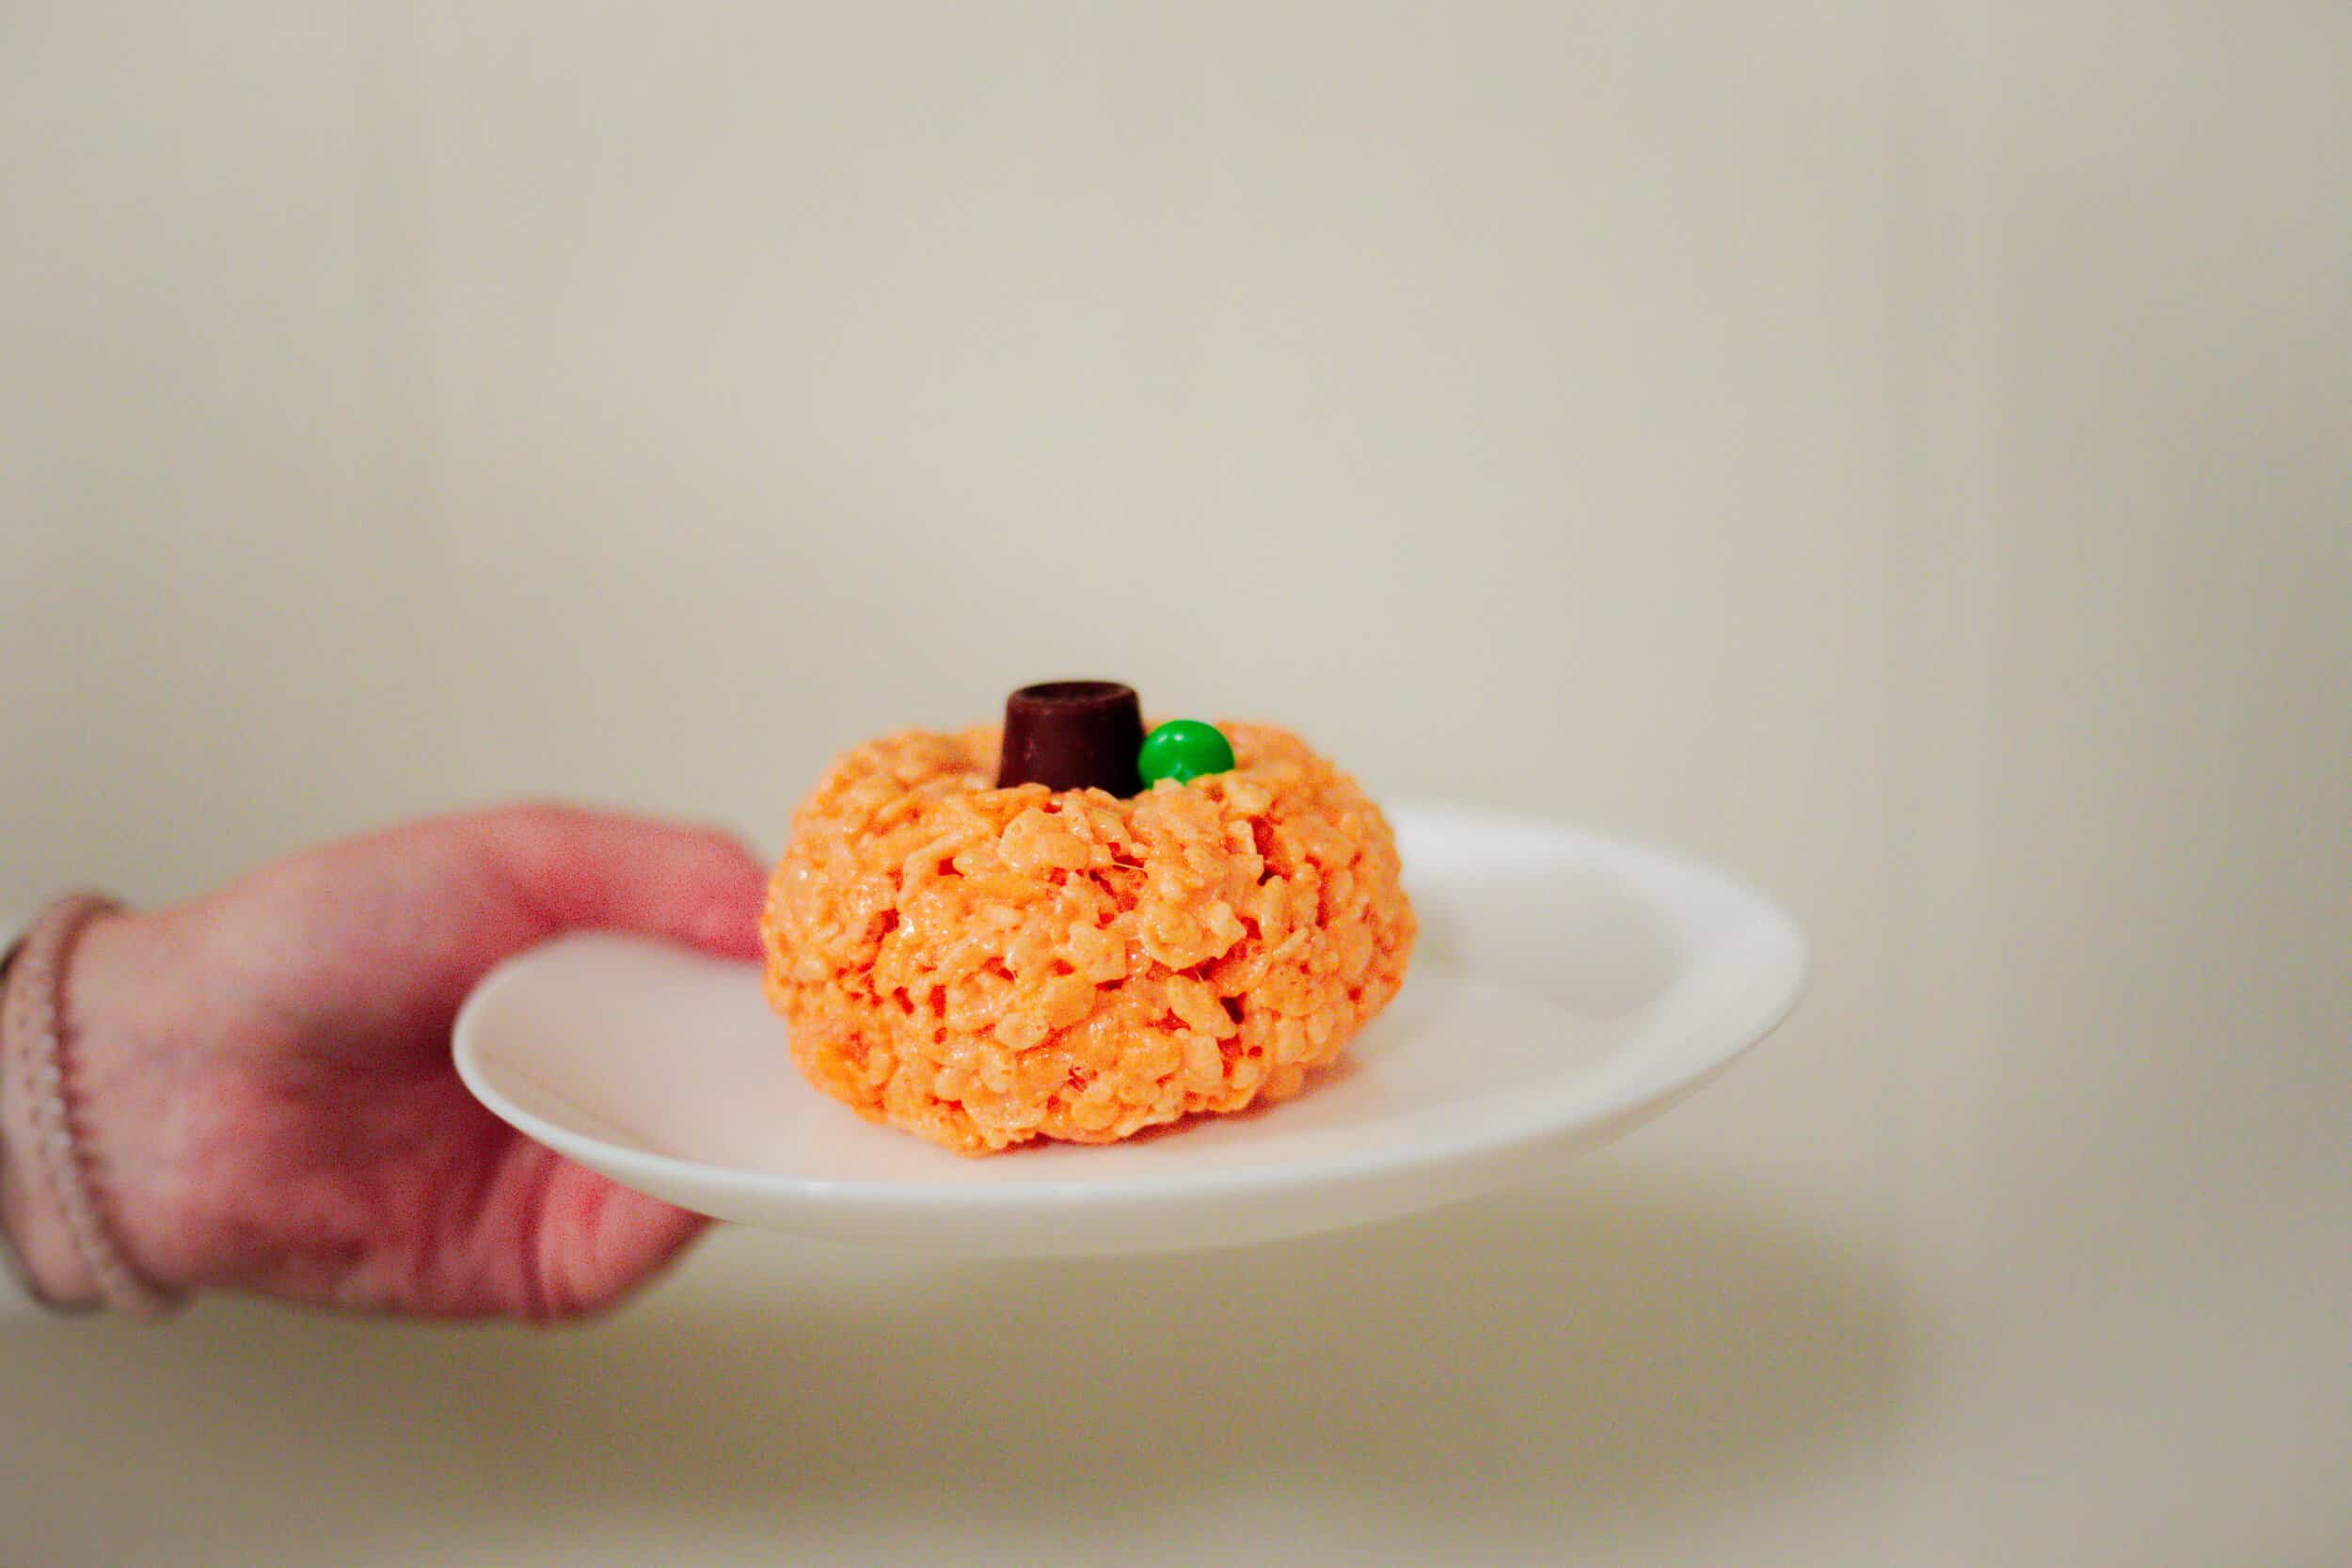 And there you have it. A cute and tasty treat perfect for a Thanksgiving dessert.